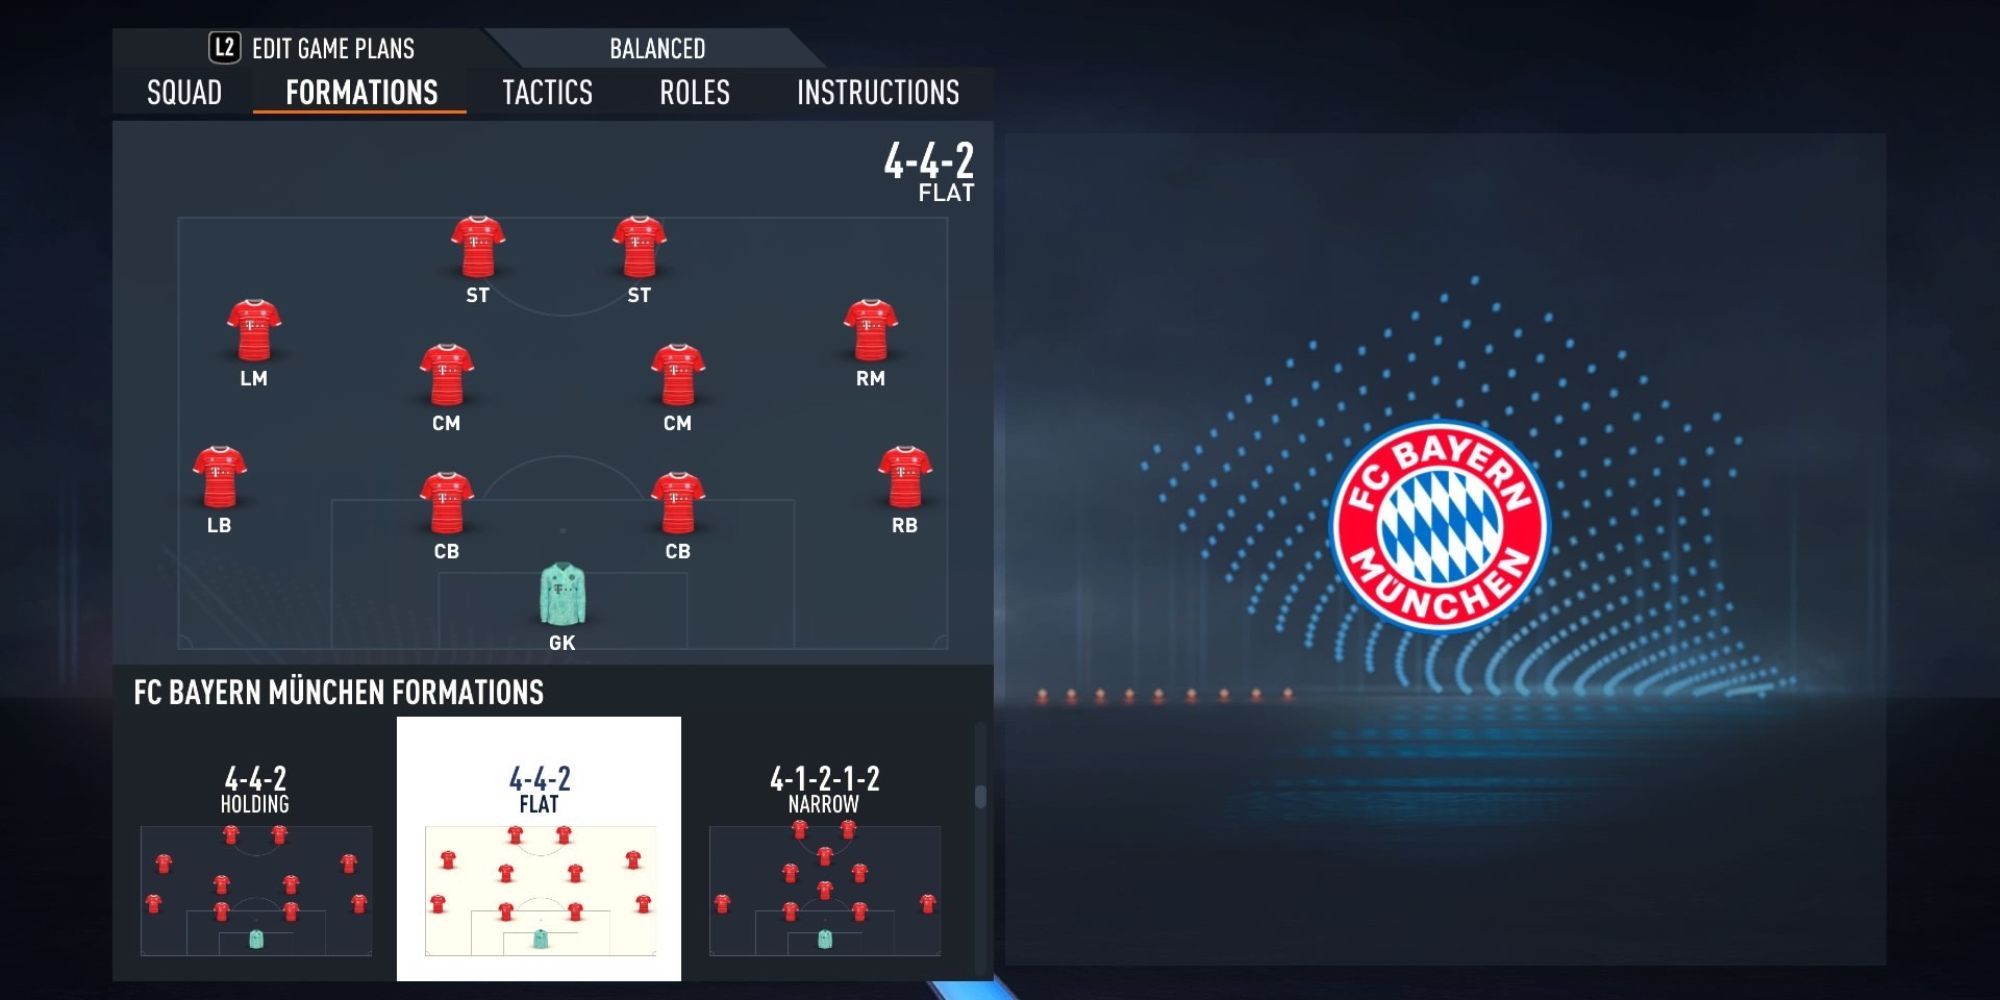 A 442 formation with Bayern on FIFA 23